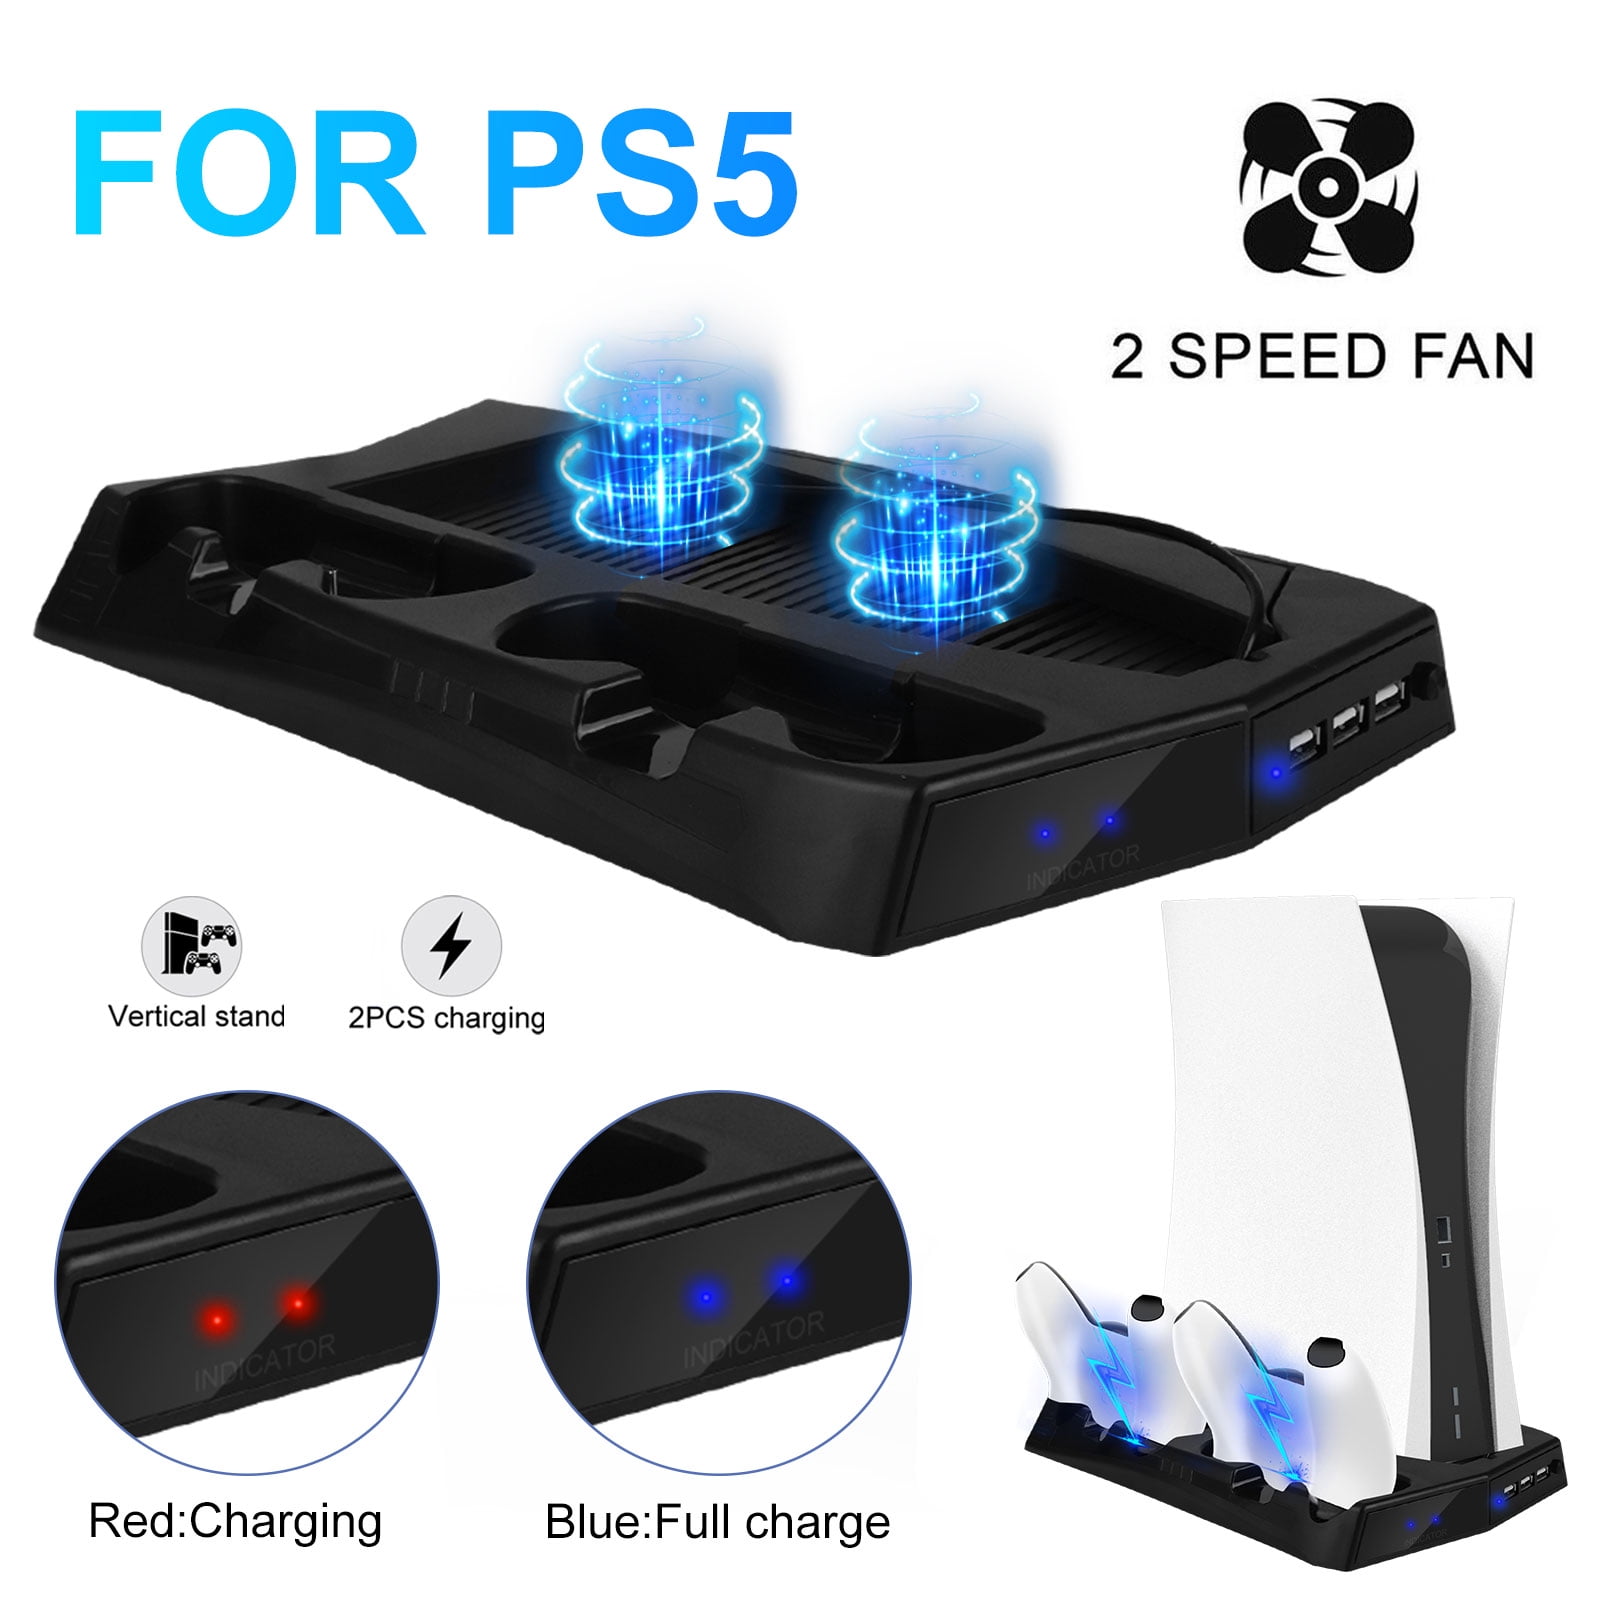  Arespark PS5 Cooling Station, Vertical PS5 Charging